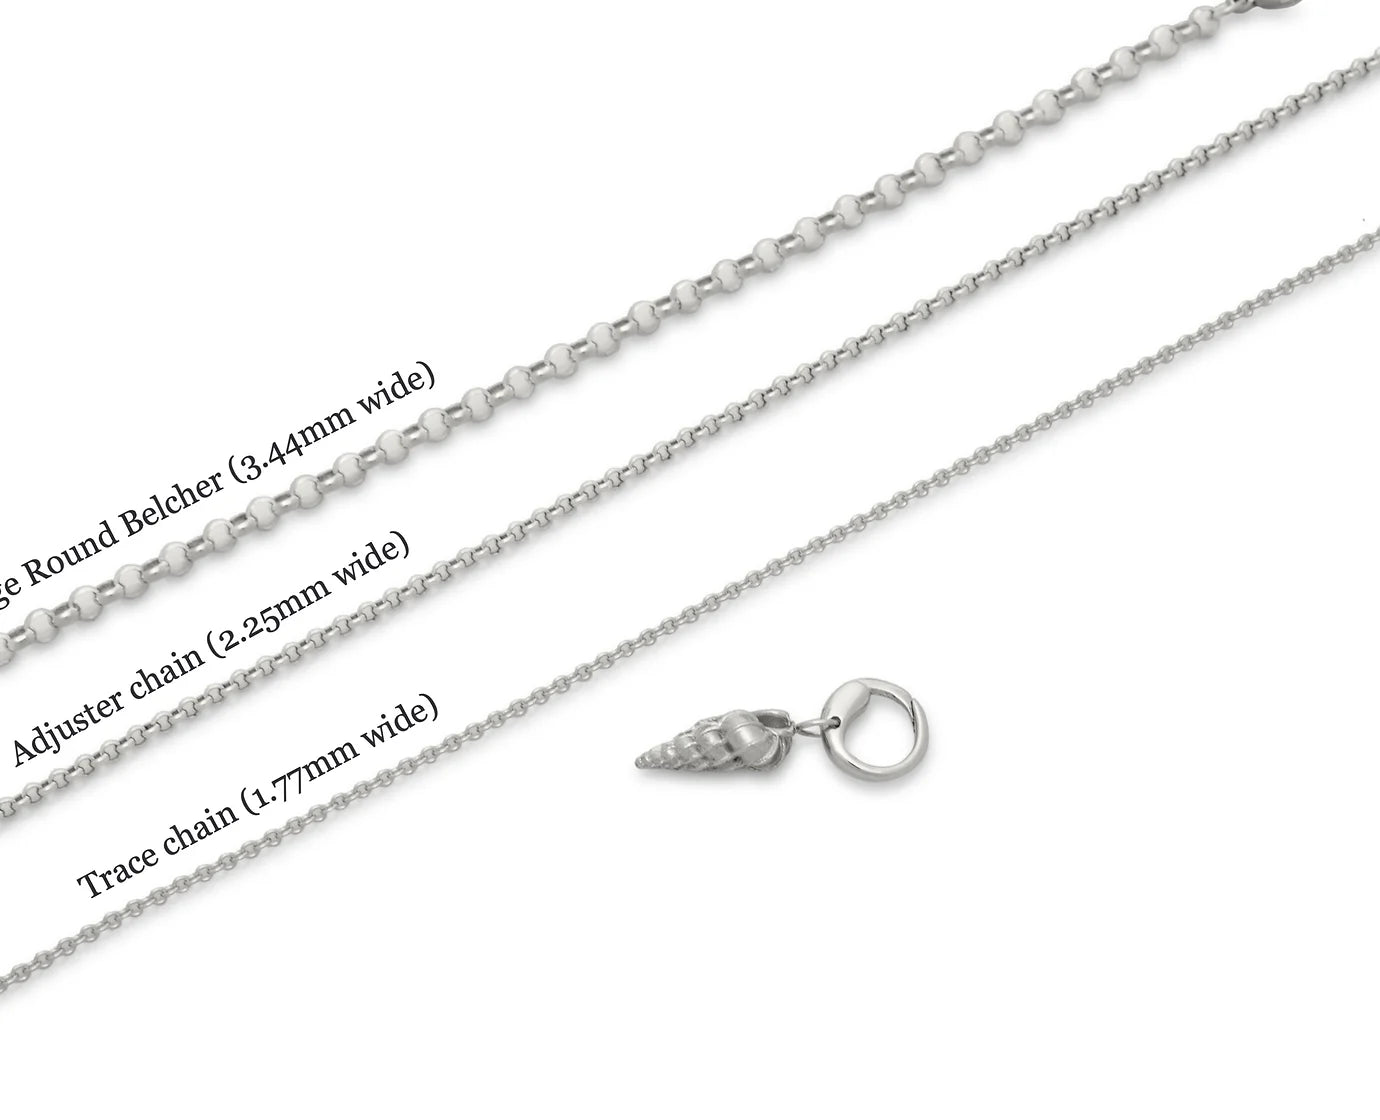 West Wittering pendant. West Wittering charm. West Wittering necklace. West Wittering shell jewellery. Silver shell jewellery. Gold shell jewellery. Those Happy Places. Serena Ansell Jewellery.